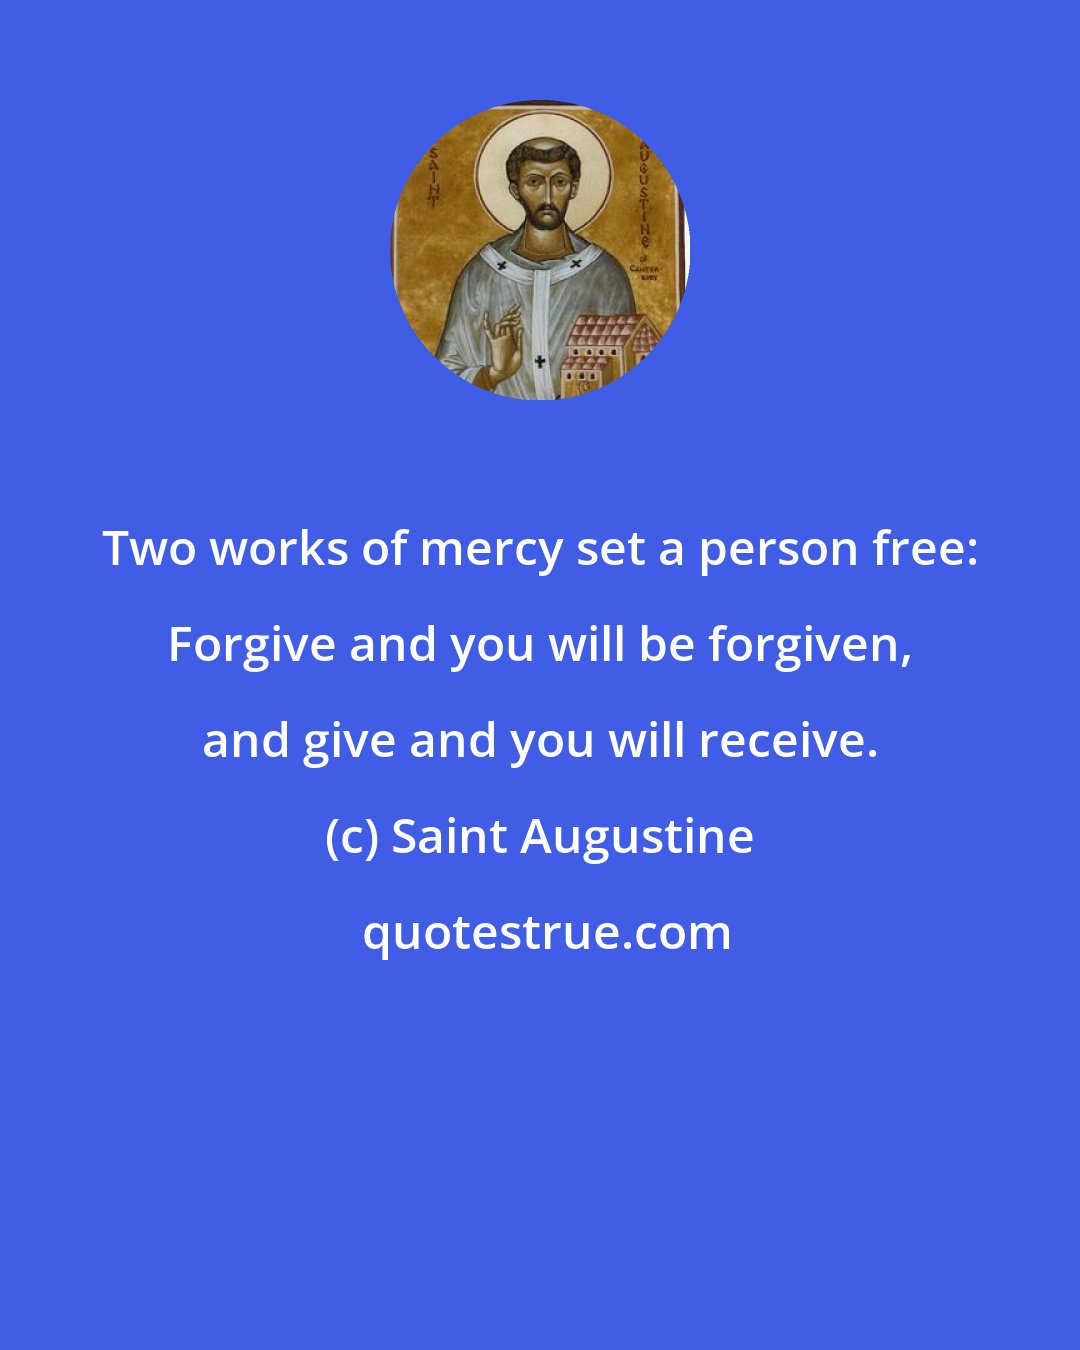 Saint Augustine: Two works of mercy set a person free: Forgive and you will be forgiven, and give and you will receive.